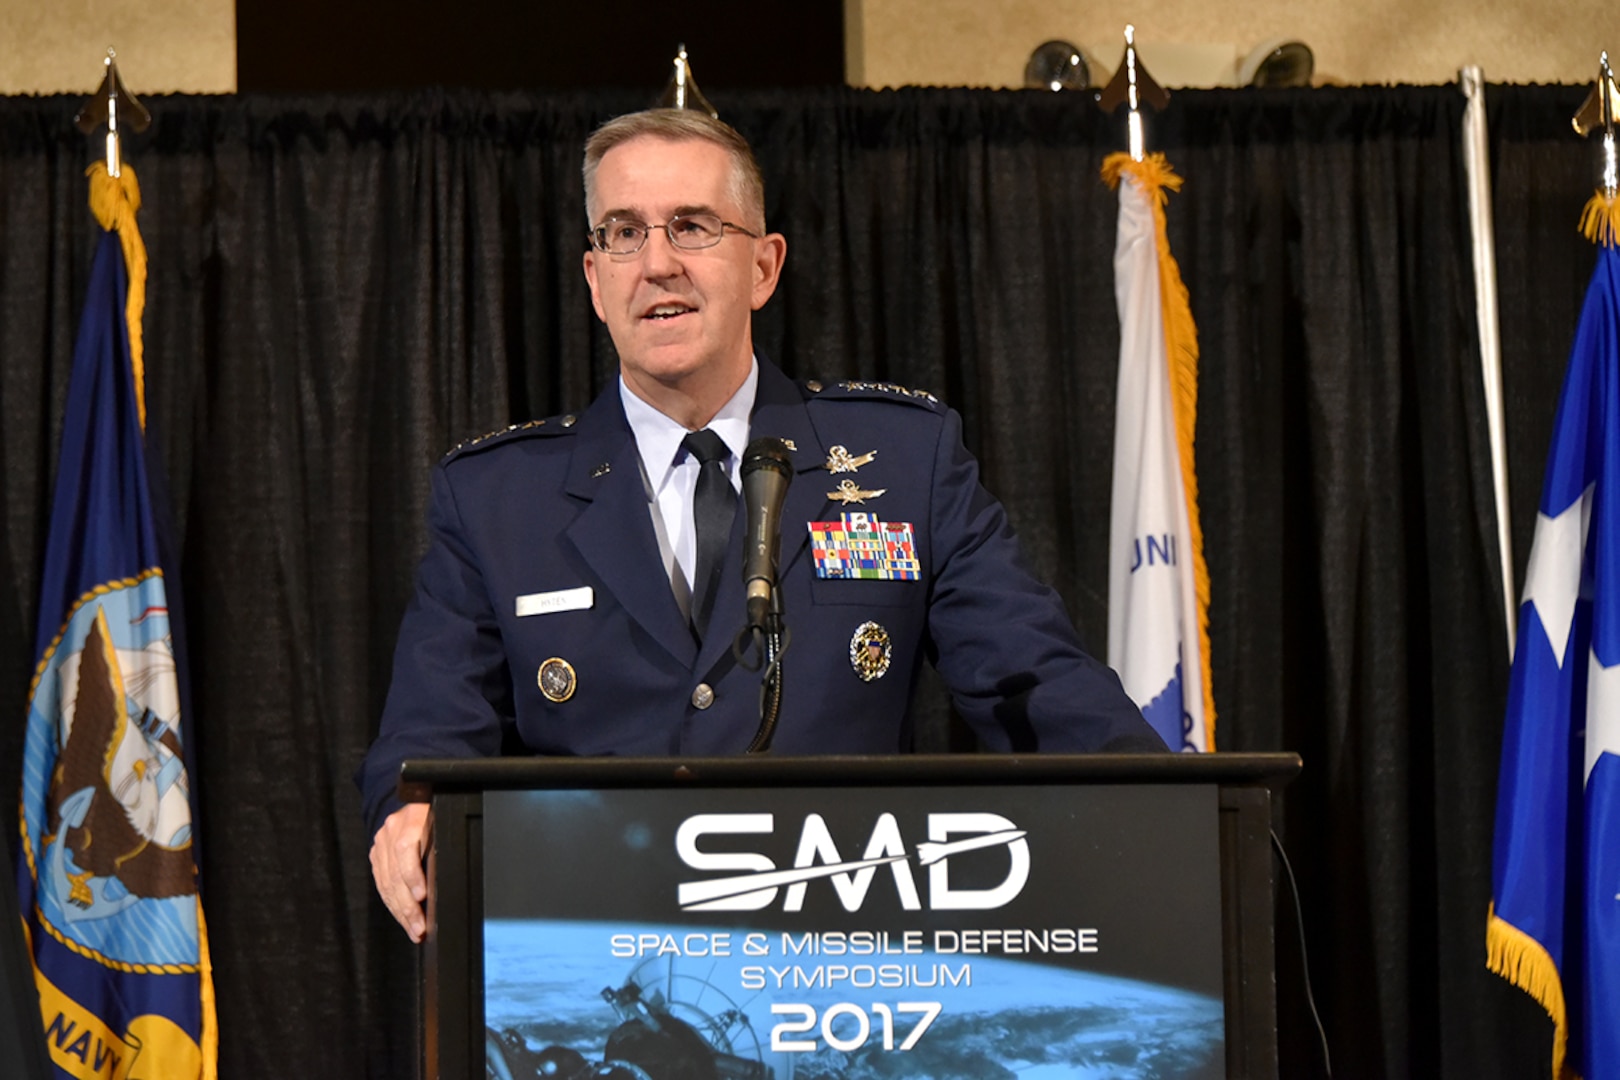 Air Force Gen. John E. Hyten, commander of U.S. Strategic Command, speaks at the 20th annual Space and Missile Defense Symposium.